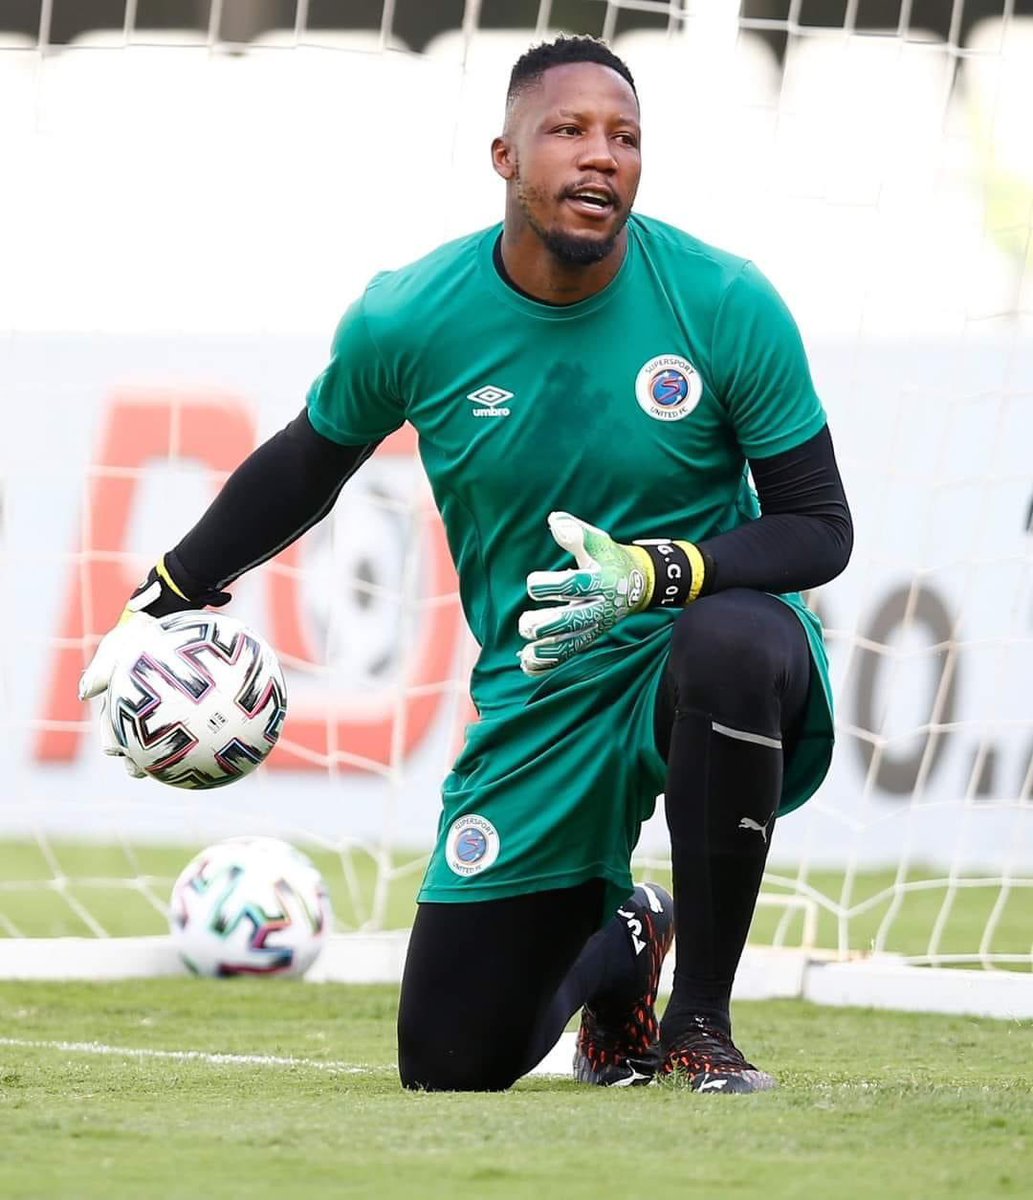 Former Warriors and Dynamos goalkeeper George Chigova dies aged 32. He collapsed and died yesterday at his South African home after having been diagnosed with a heart condition. He had recently returned to soccer after a lengthy break.